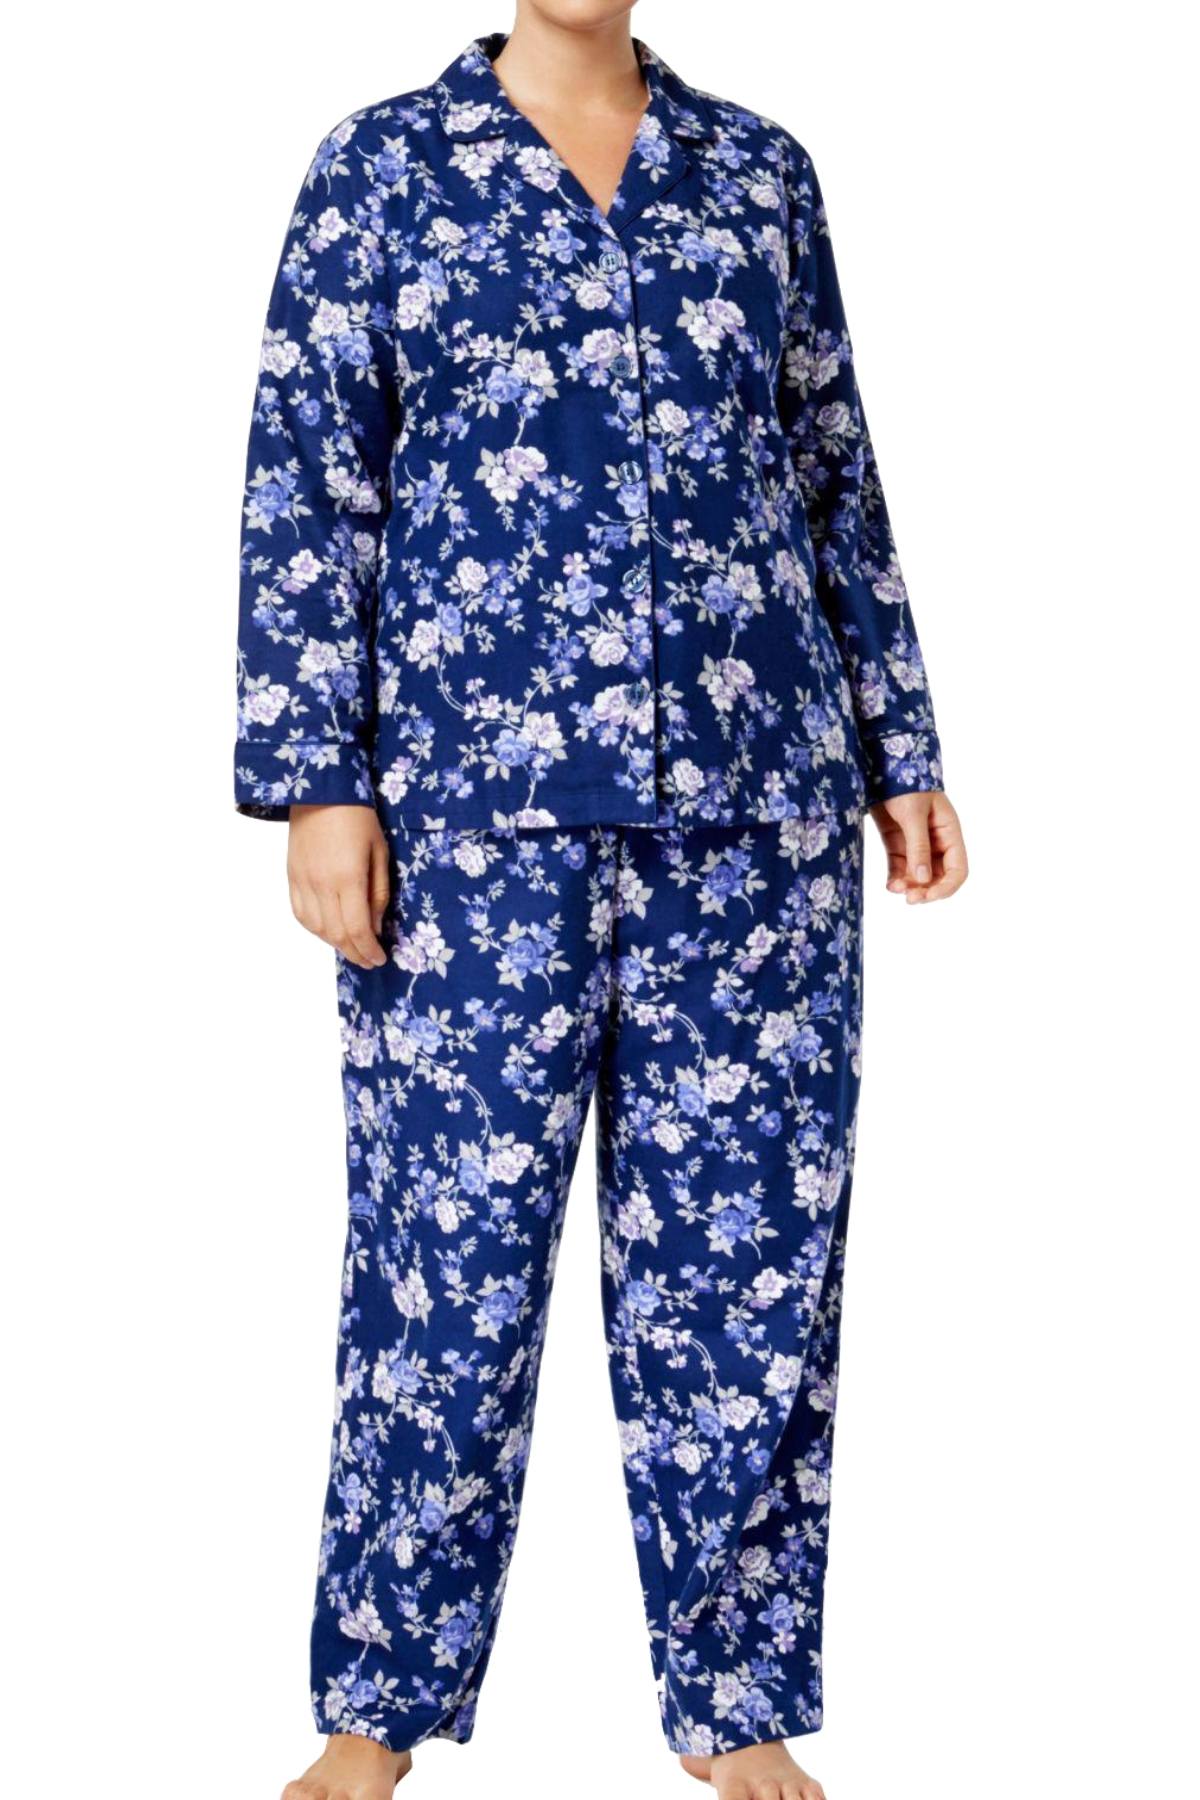 Charter Club Intimates Rose-Garden Floral-Printed Cotton/Flannel Pajama Set